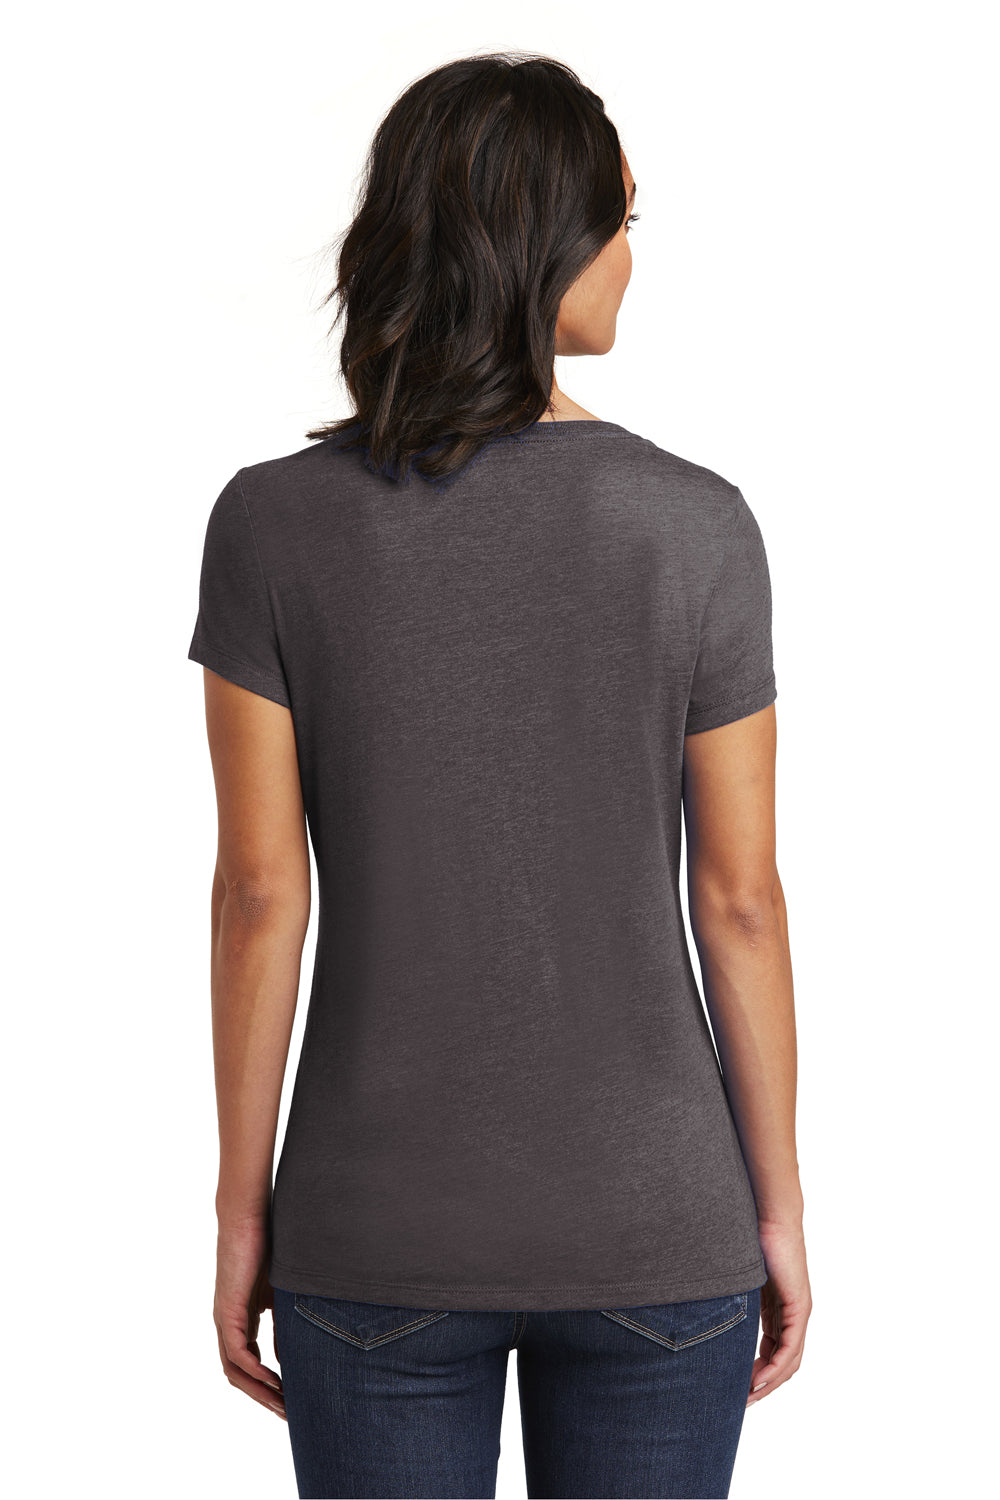 District DT6503 Womens Very Important Short Sleeve V-Neck T-Shirt Heather Charcoal Grey Back